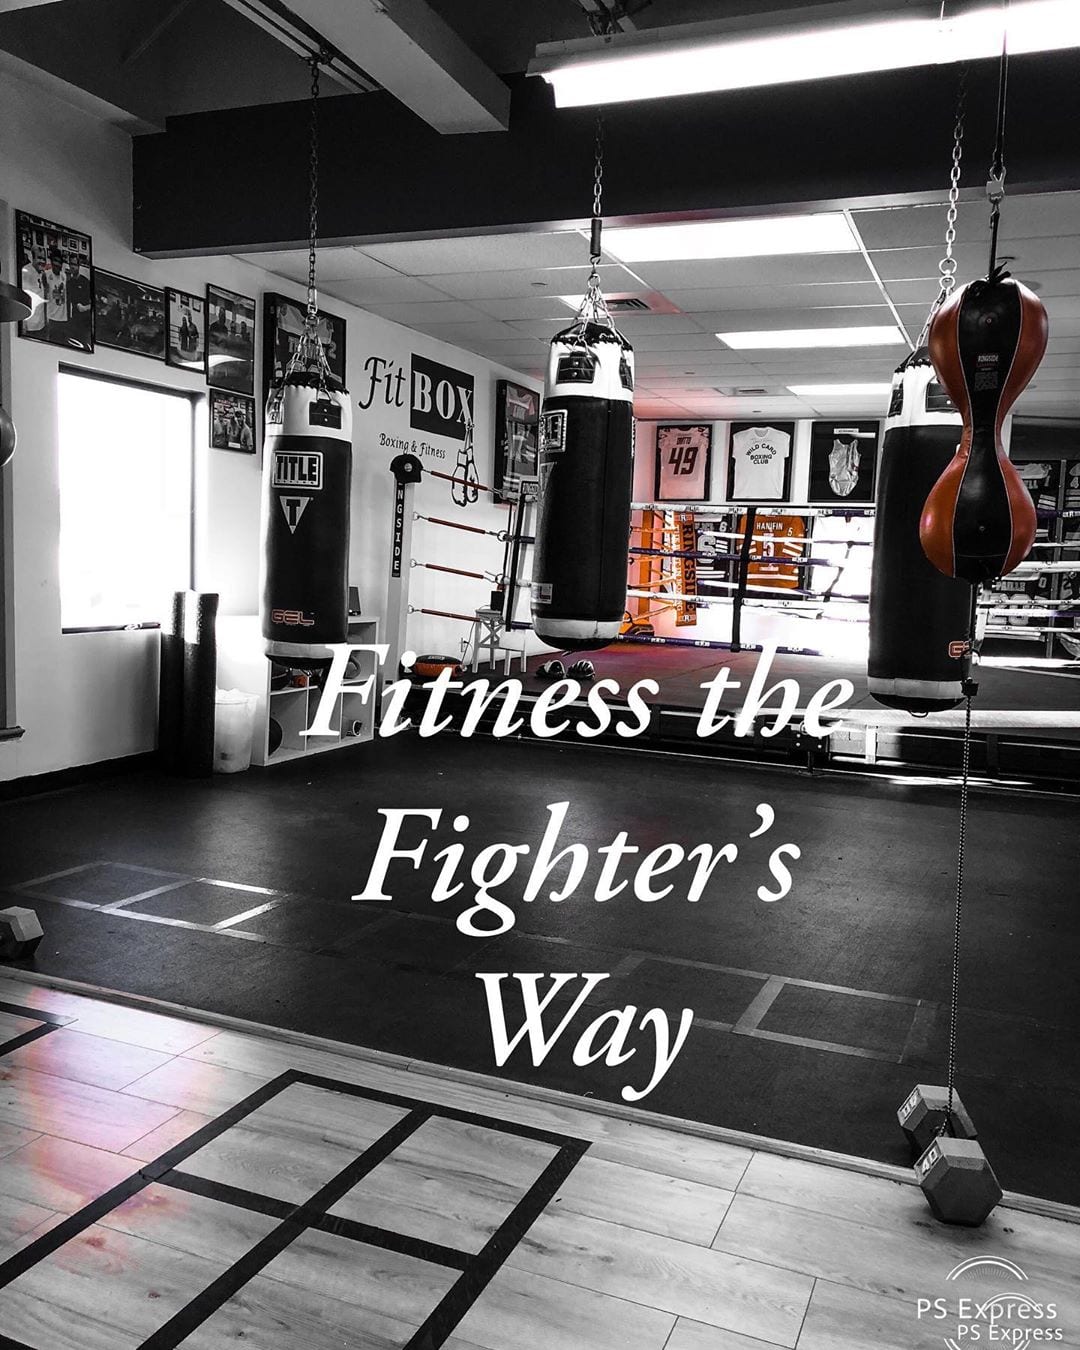 Fitness the Fighter’s way. Contact us Today and try a Free Boxing Workout located in Dedham , Ma . . #boxing #workout #workoutmotivation #fitness #fighter #fit #hiitworkout #fundamentals #technique #boxingtrainer #boxingtraining #dedham #boston